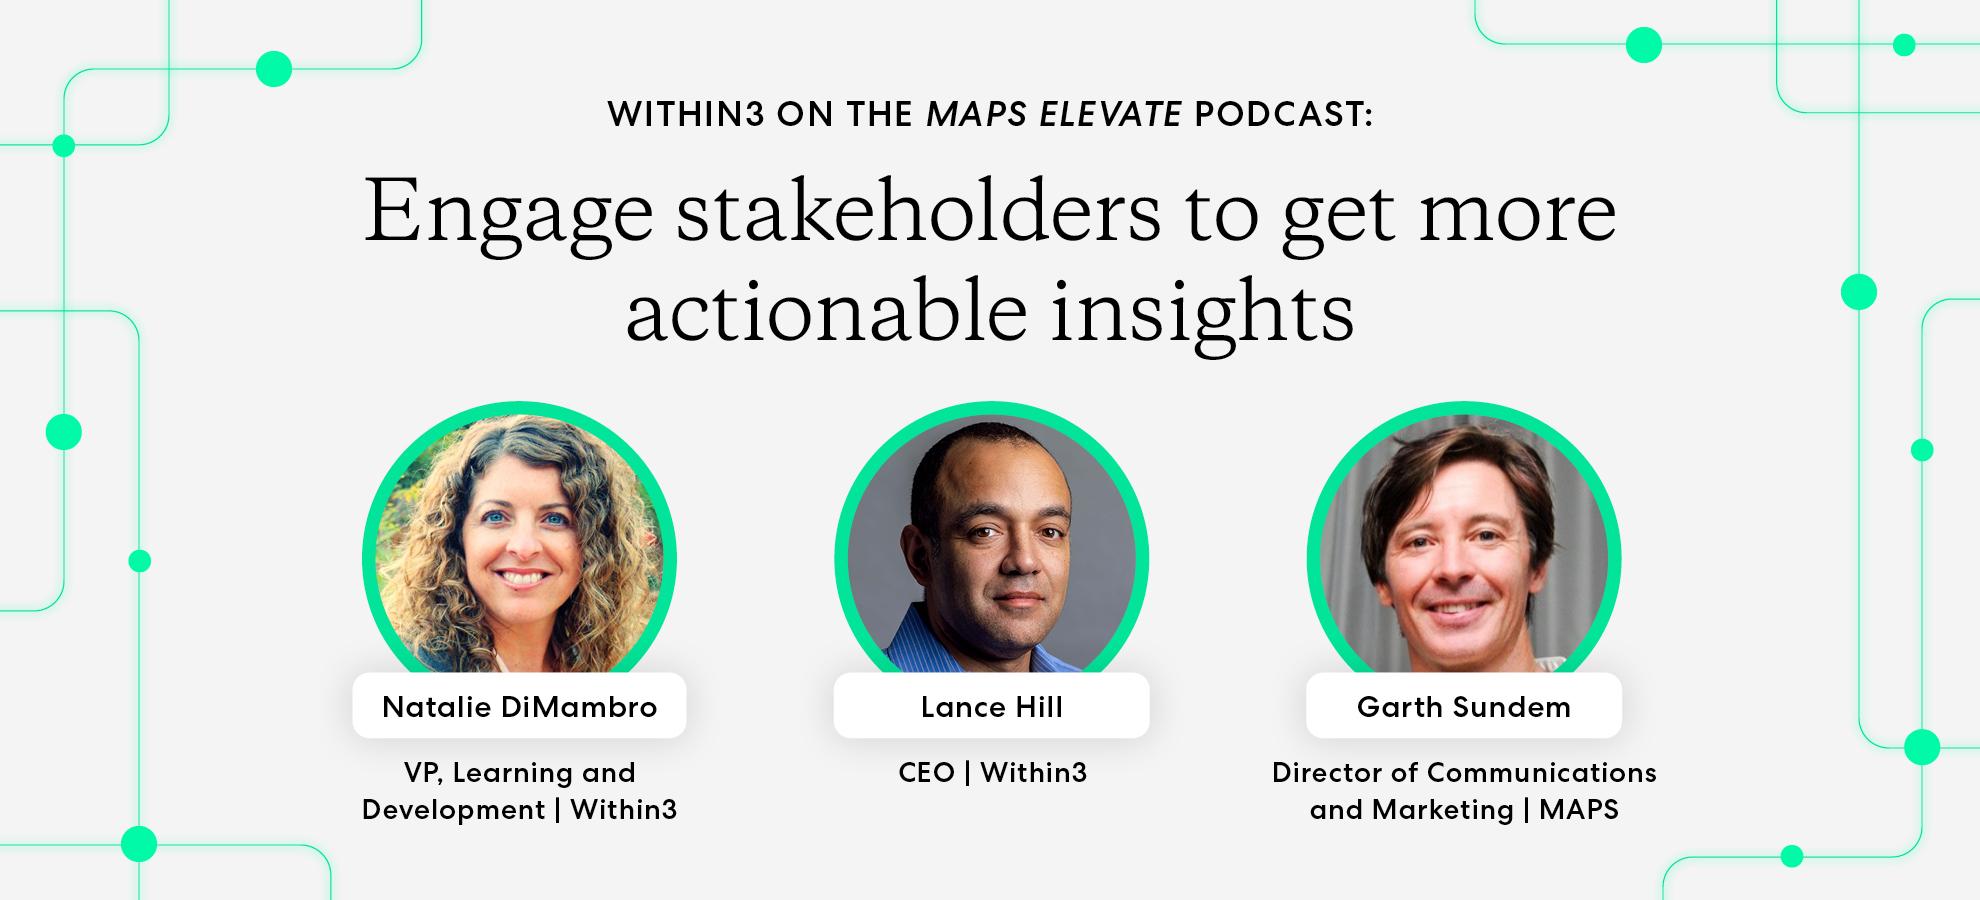 Within3 on the MAPS Elevate Podcast: Engage stakeholders to get more actionable insights